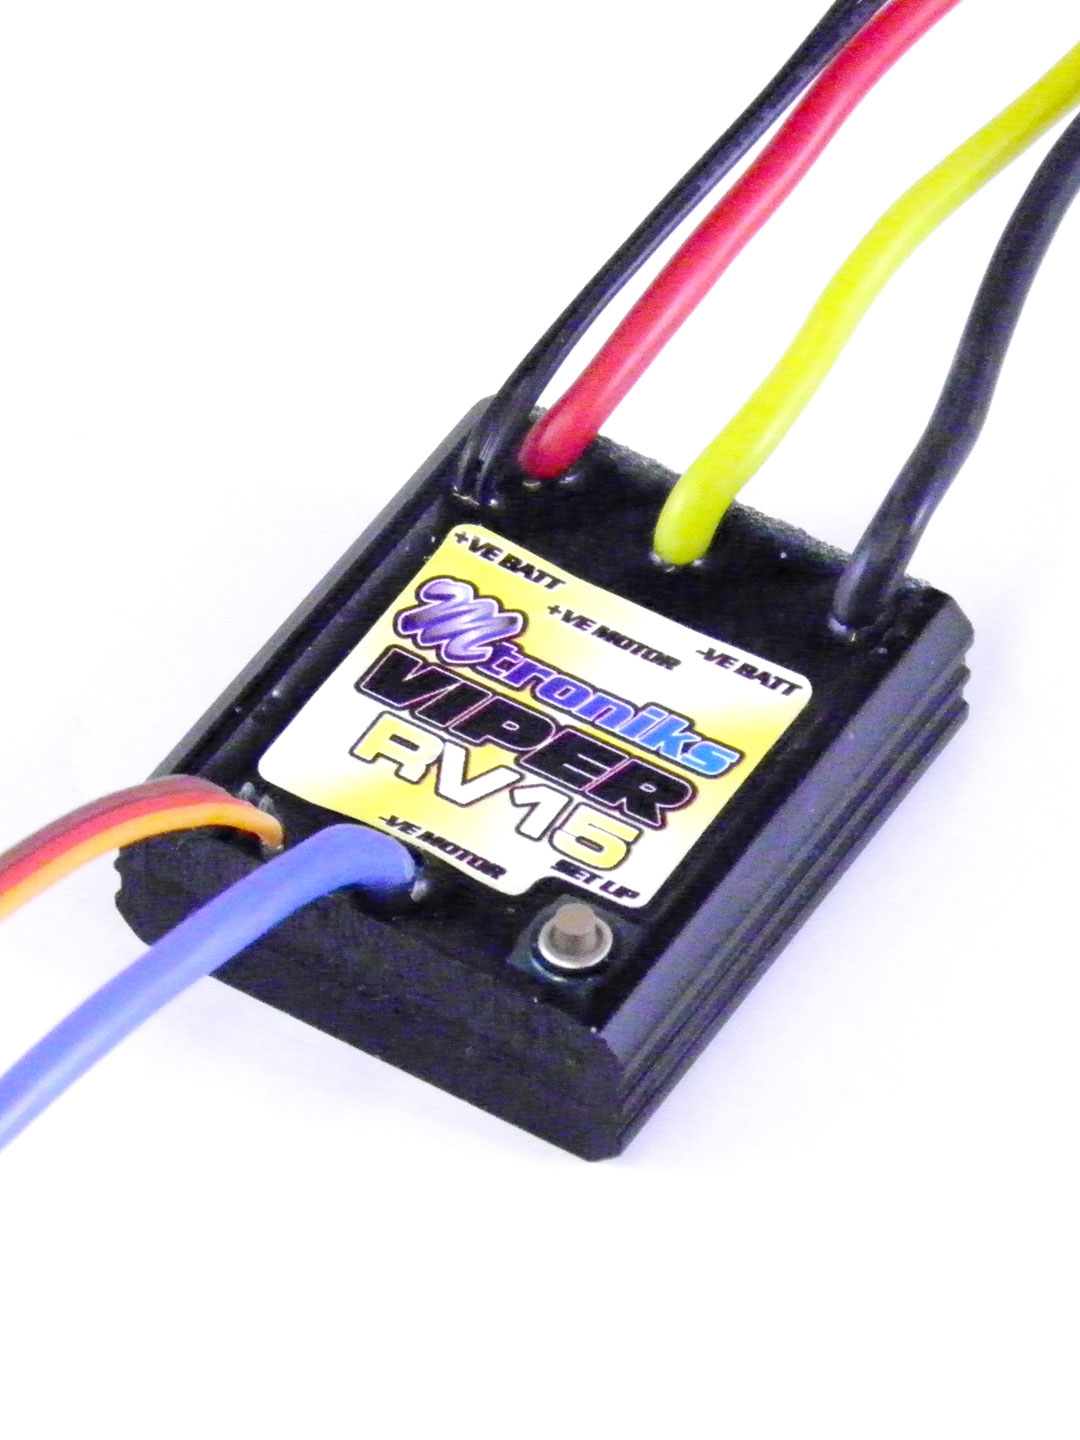 15 Turn brushed RC car speed controller